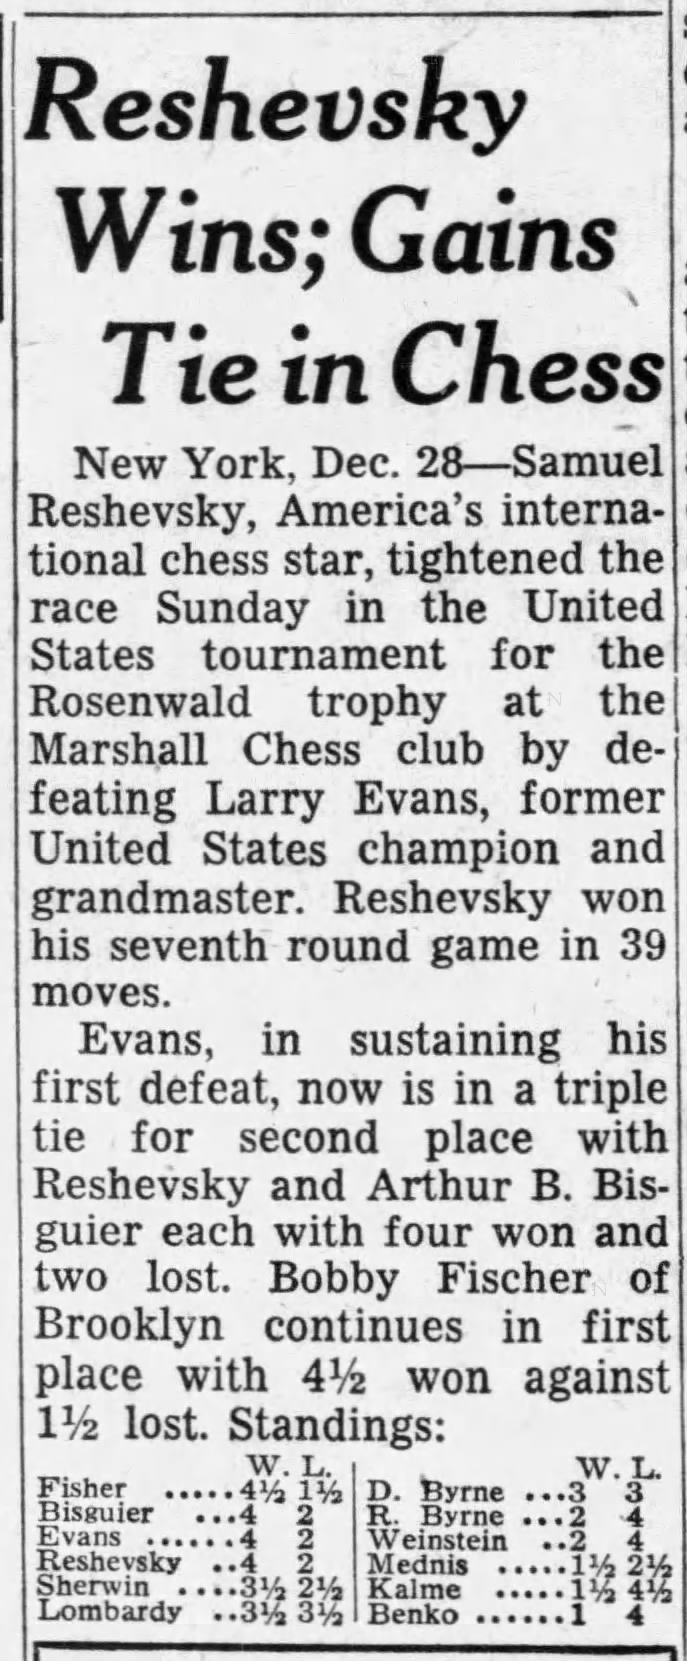 Reshevsky Wins; Gains Tie in Chess